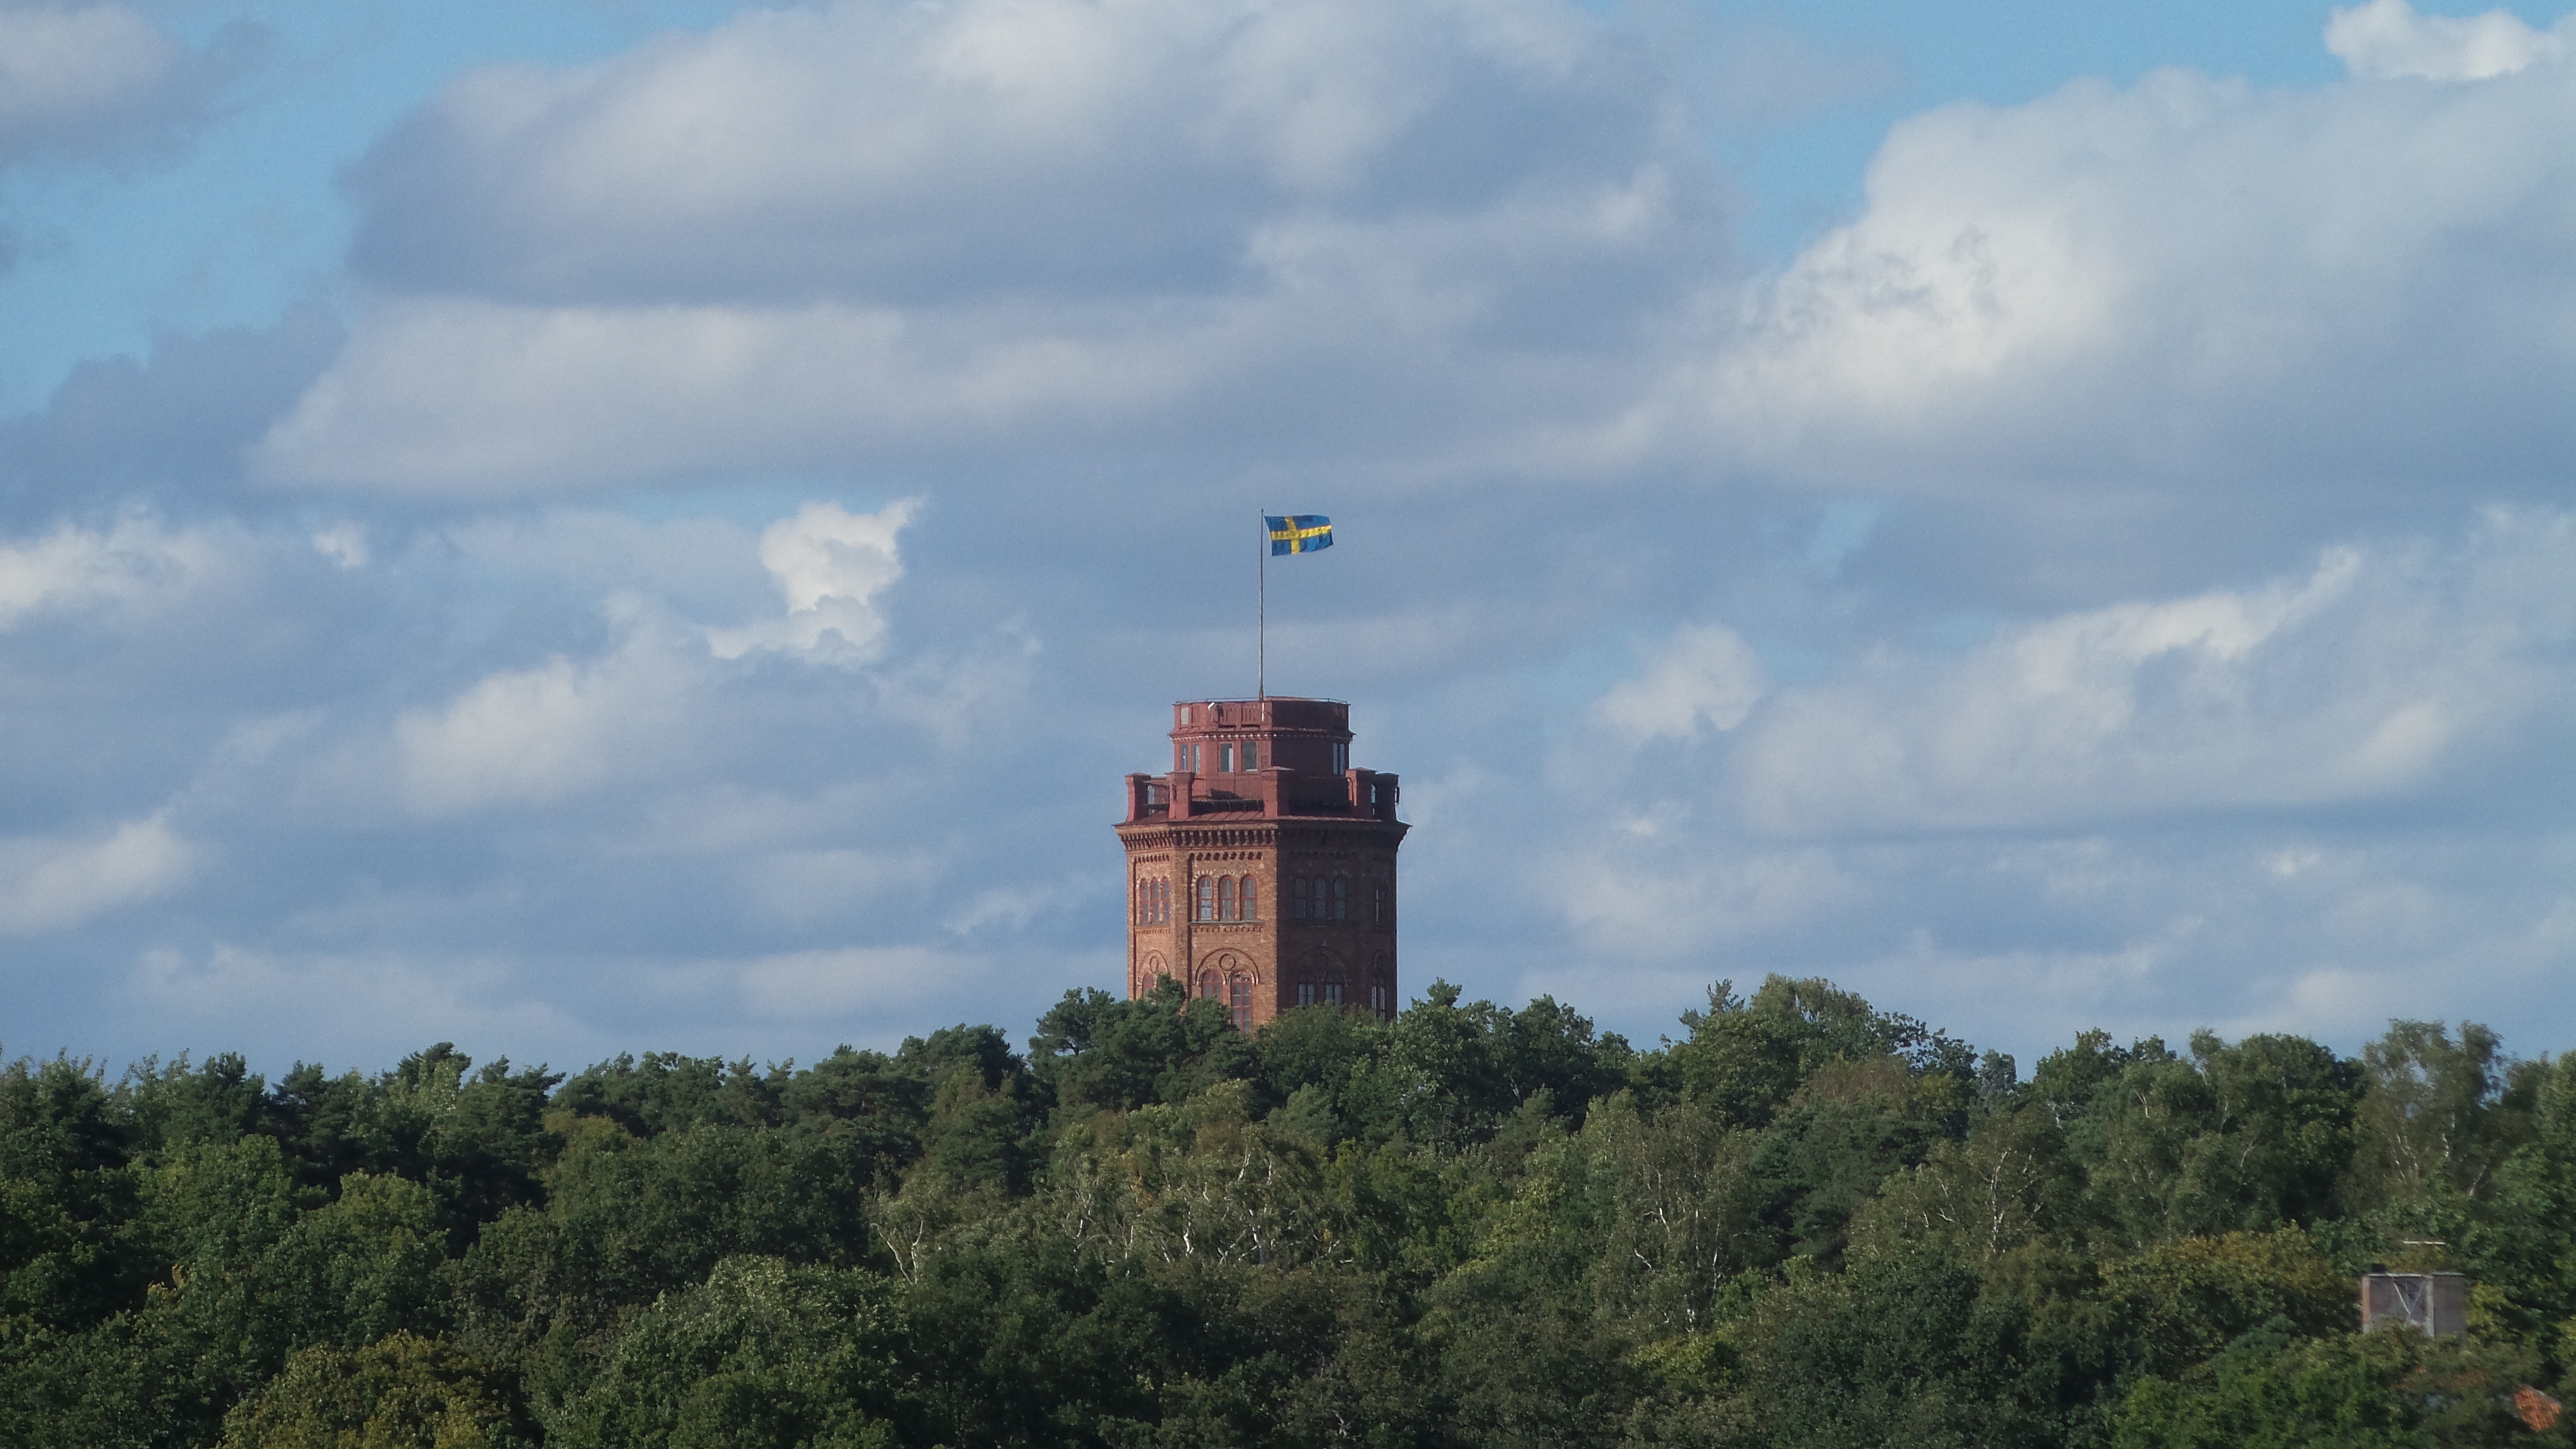 Stockholm: History, Modernity, and Frozen Delights.